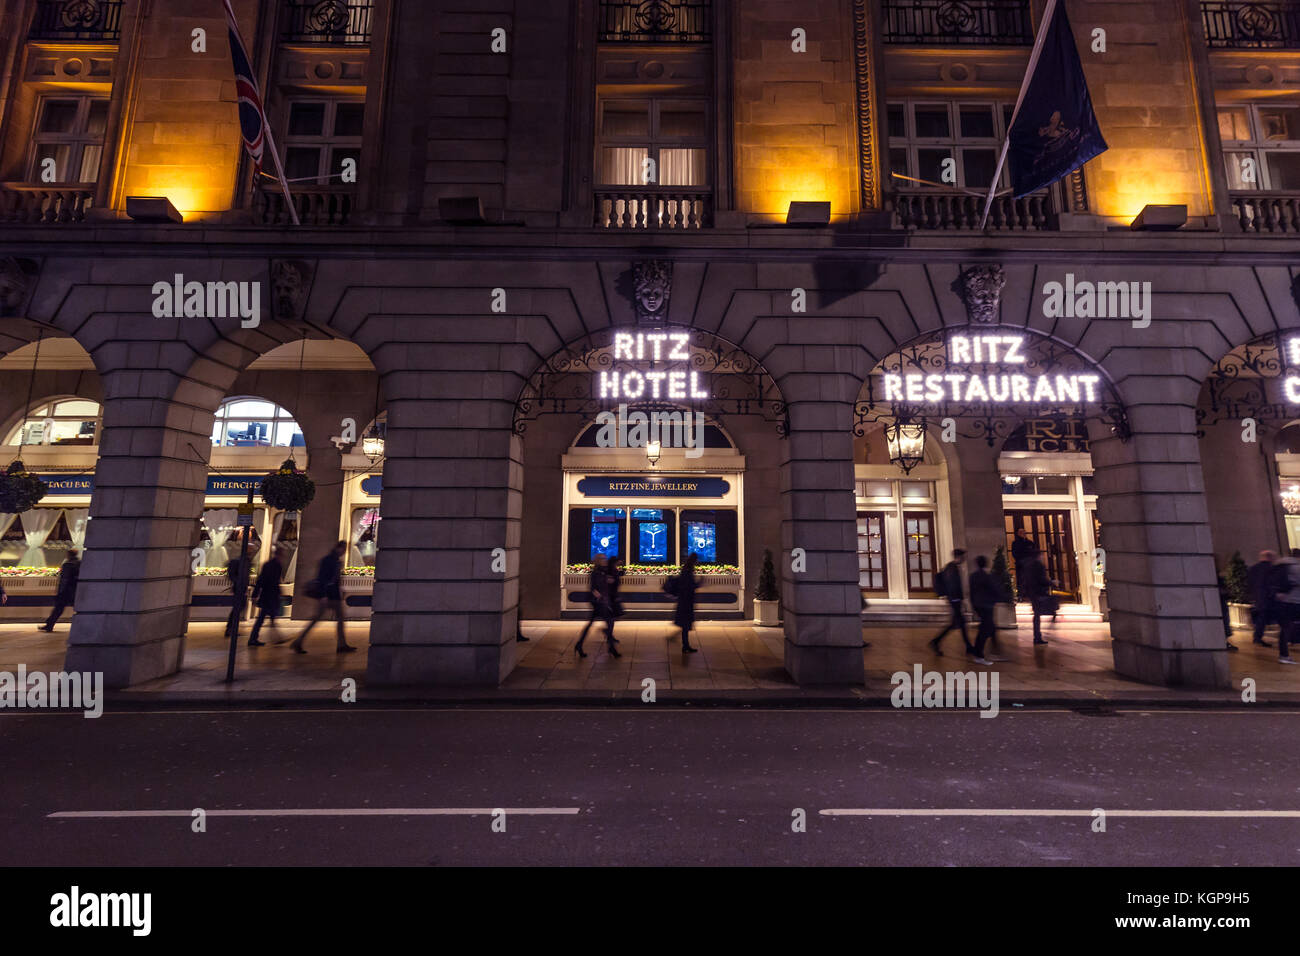 The Ritz Hotel at night in Mayfair London Stock Photo